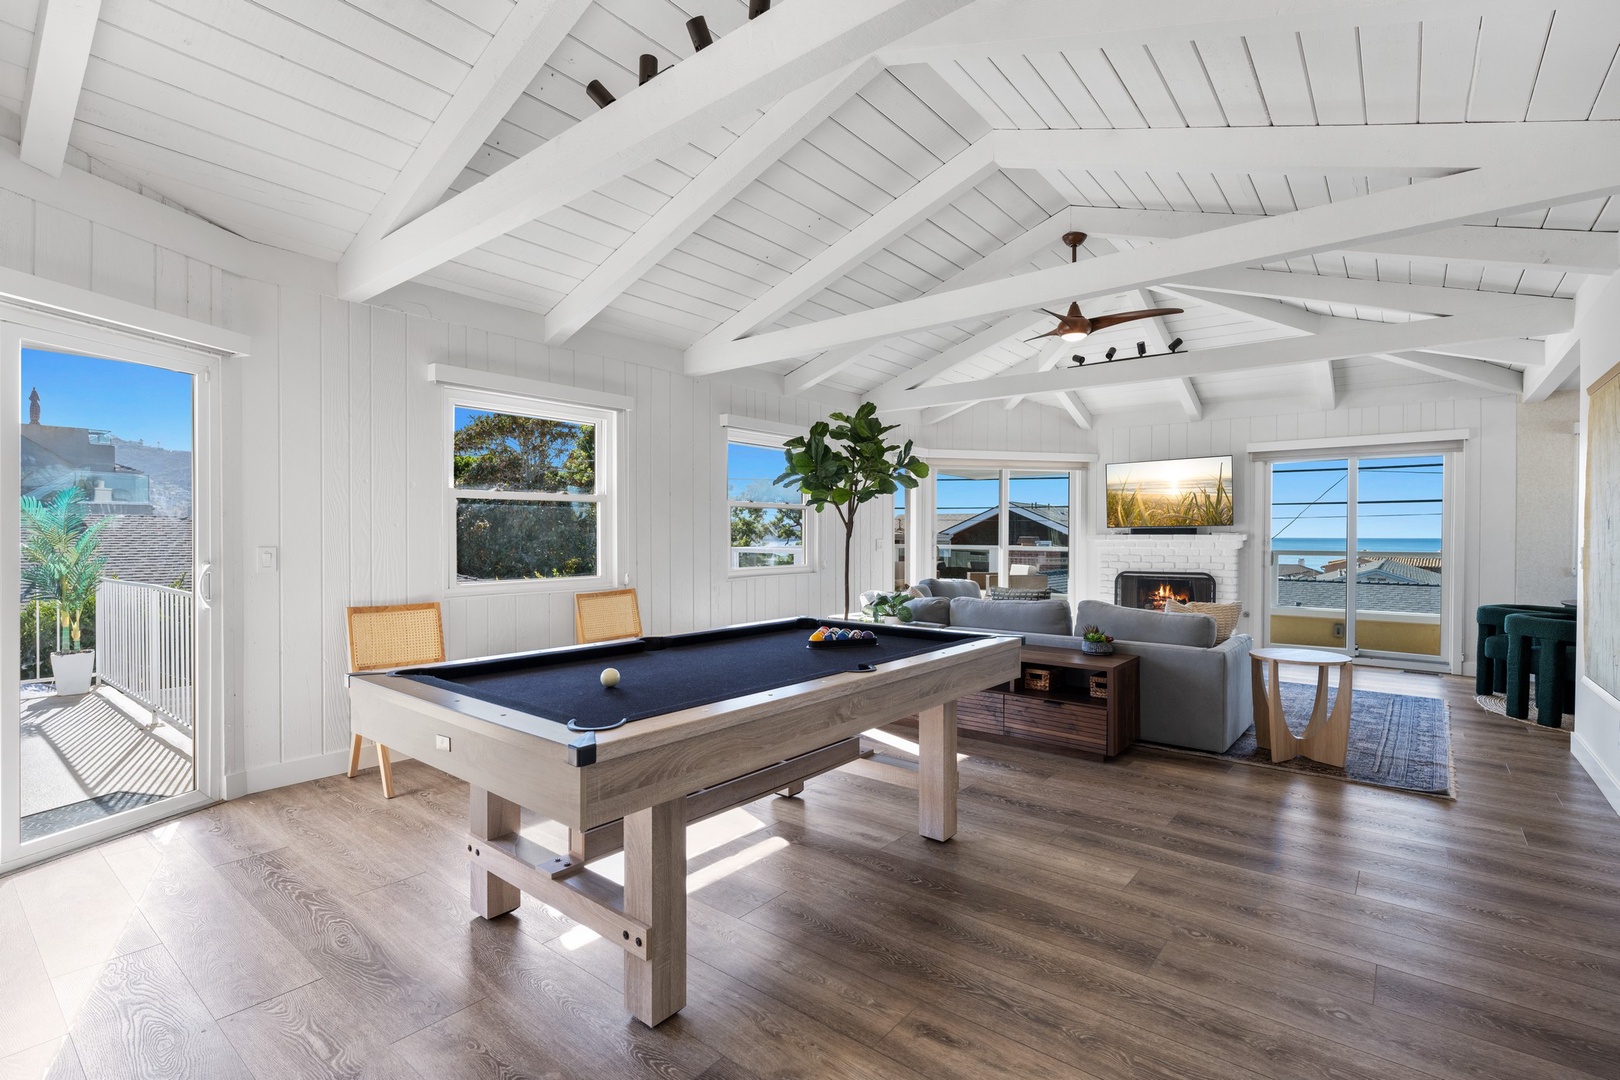 Family room with a pool table